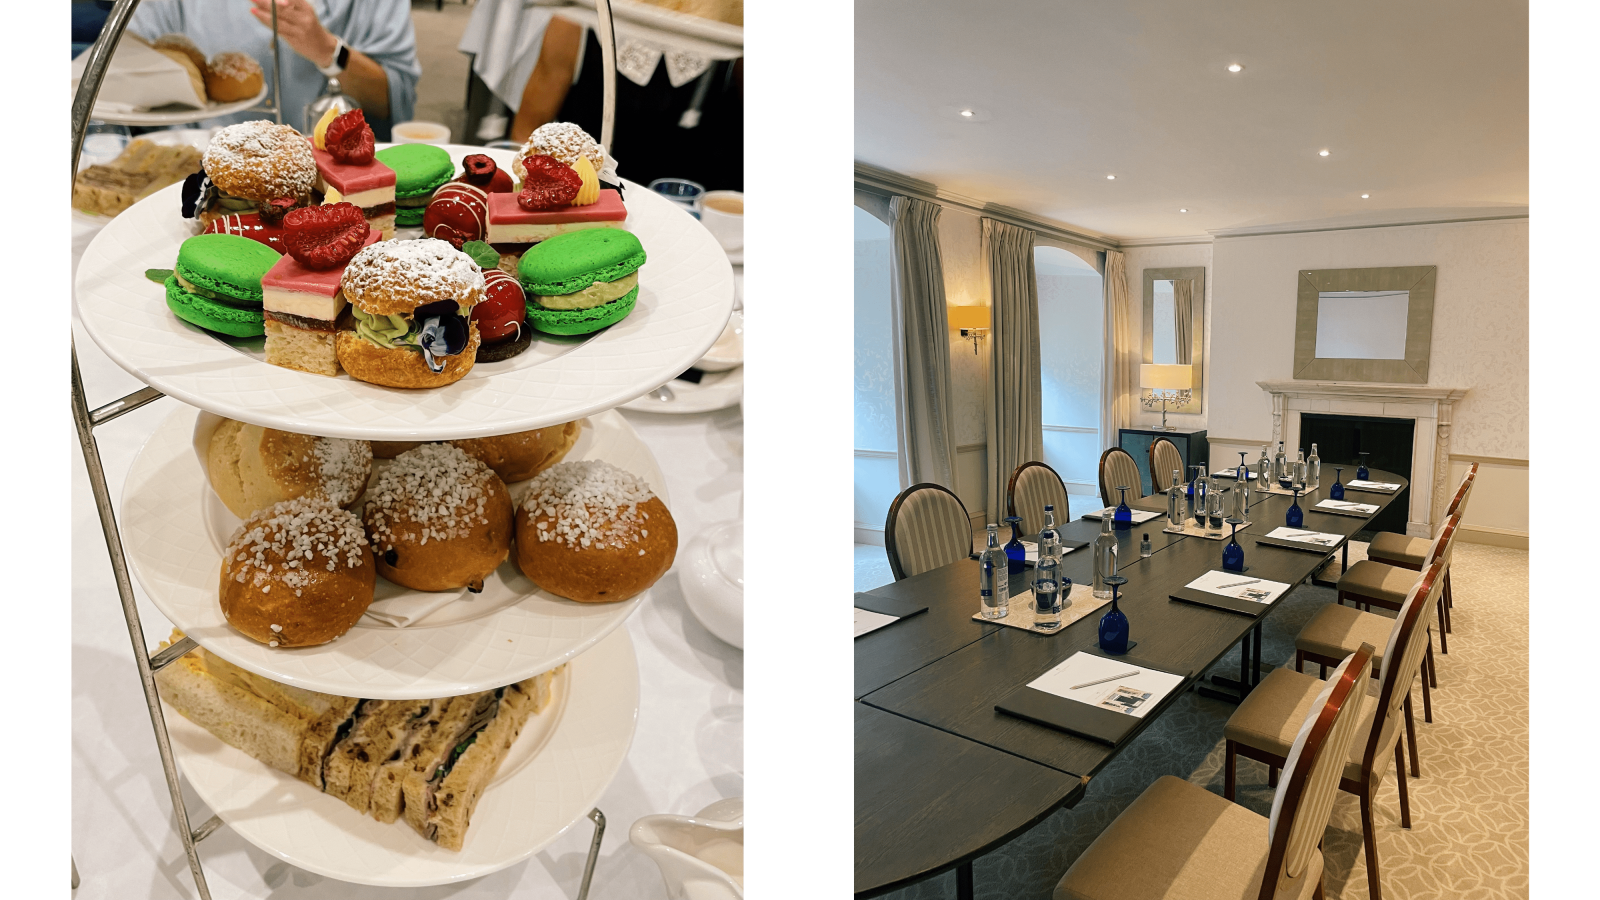 Afternoon tea and meeting space at Royal Crescent Hotel